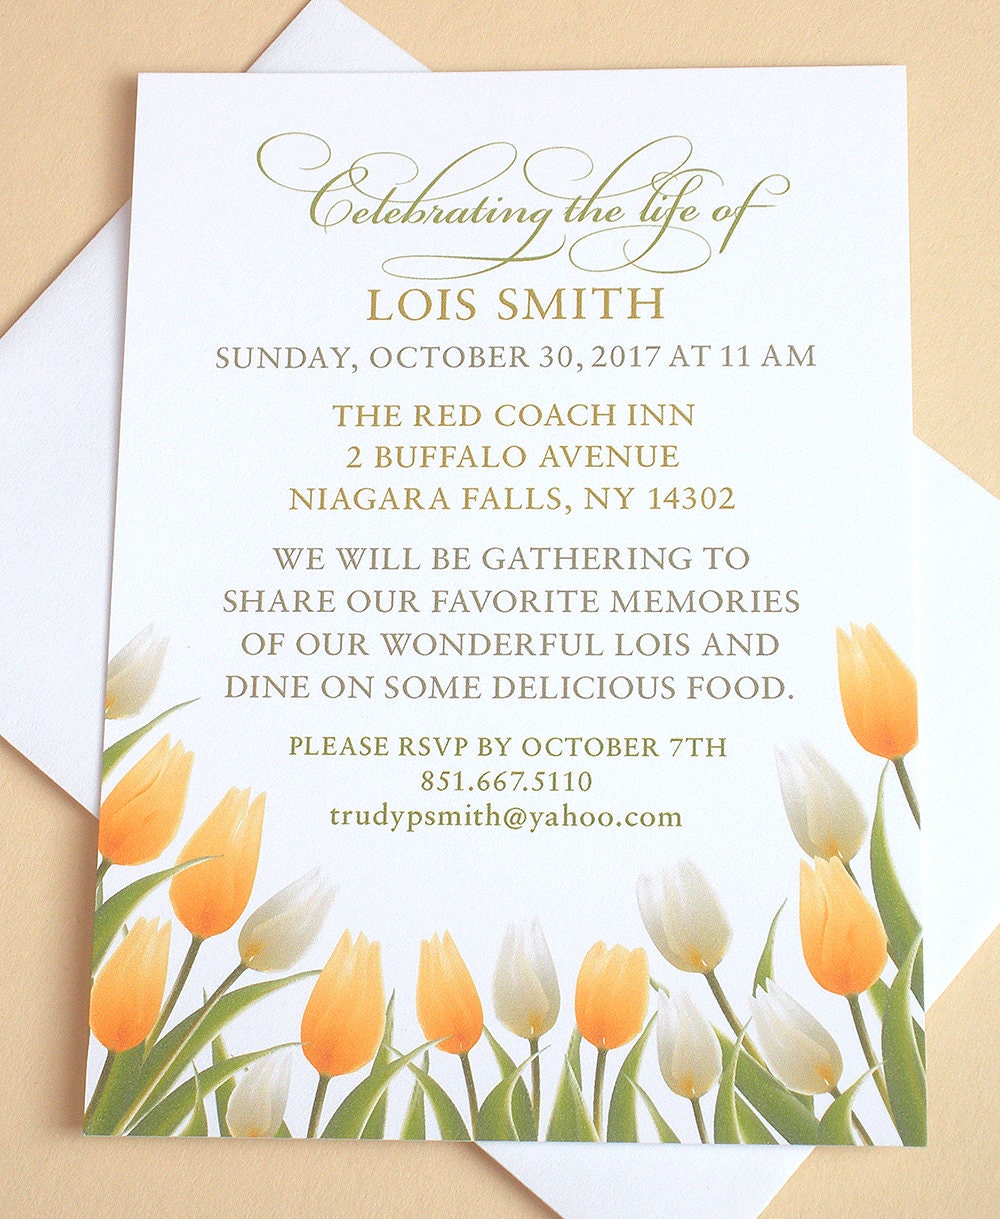 celebration-of-life-invitation-with-yellow-and-white-tulips-etsy